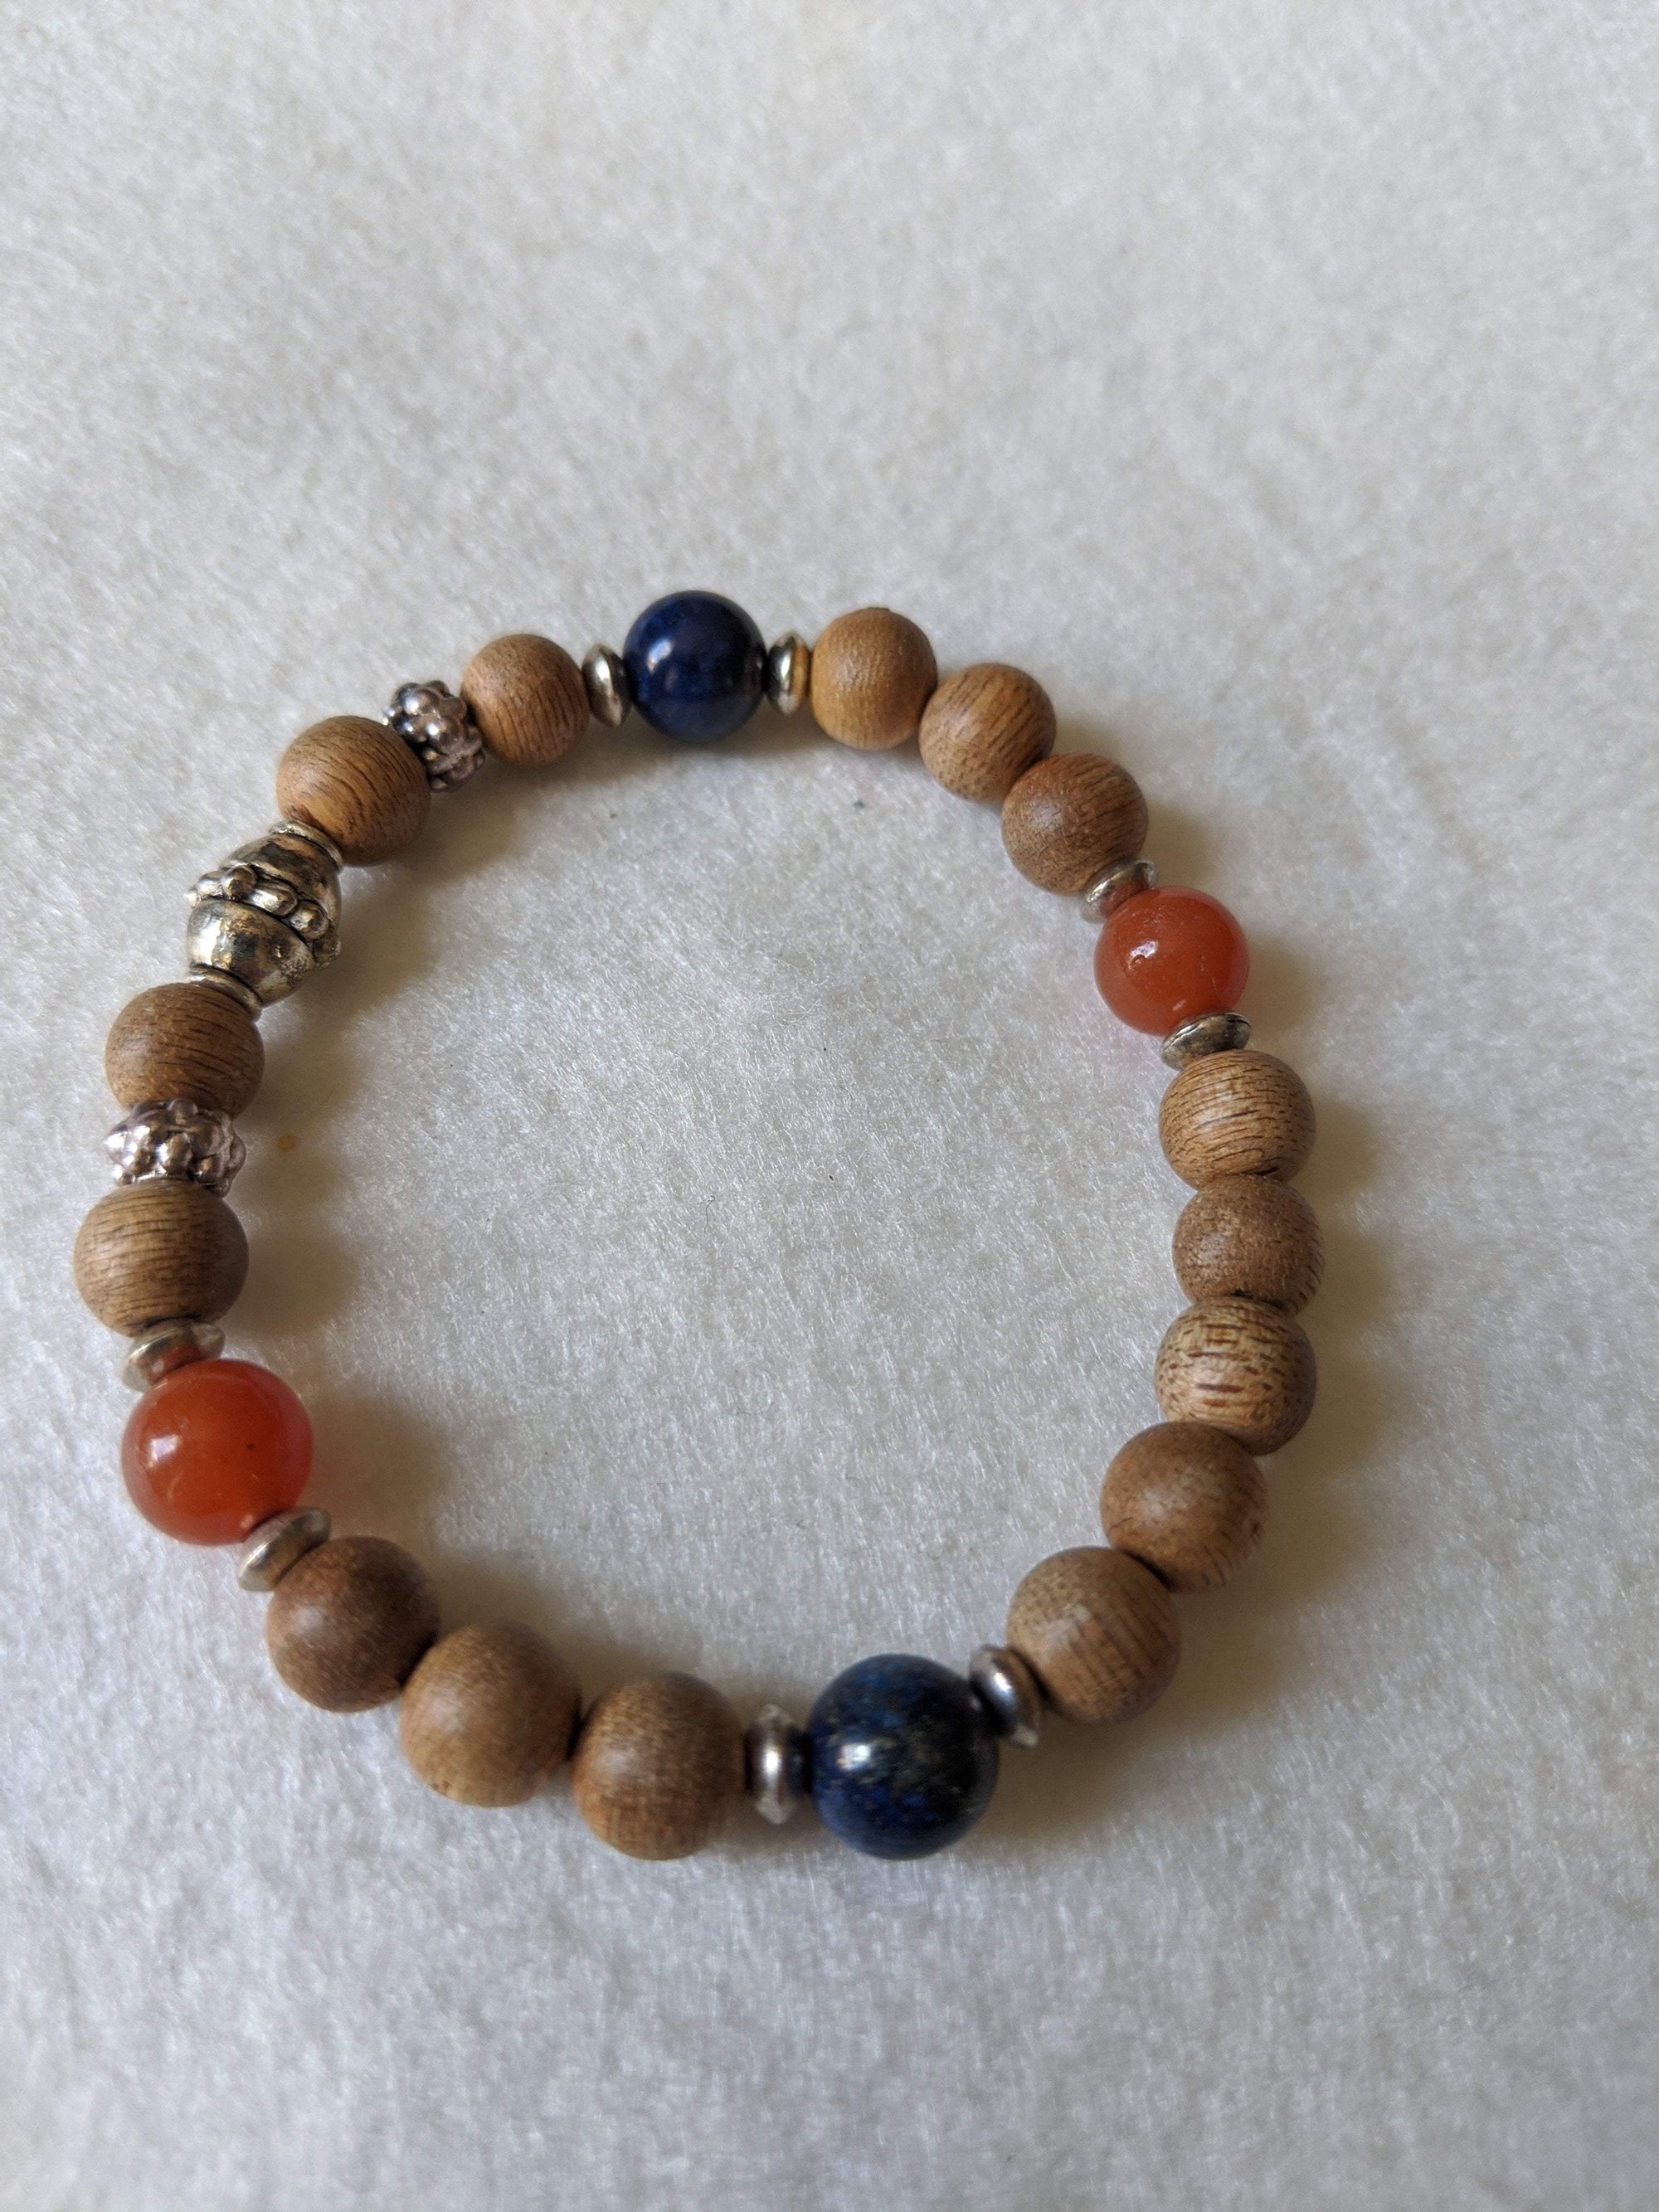 *New* The 4 Elements Metal, Wood, Water, Fire cultivated agarwood gemstone bracelet -